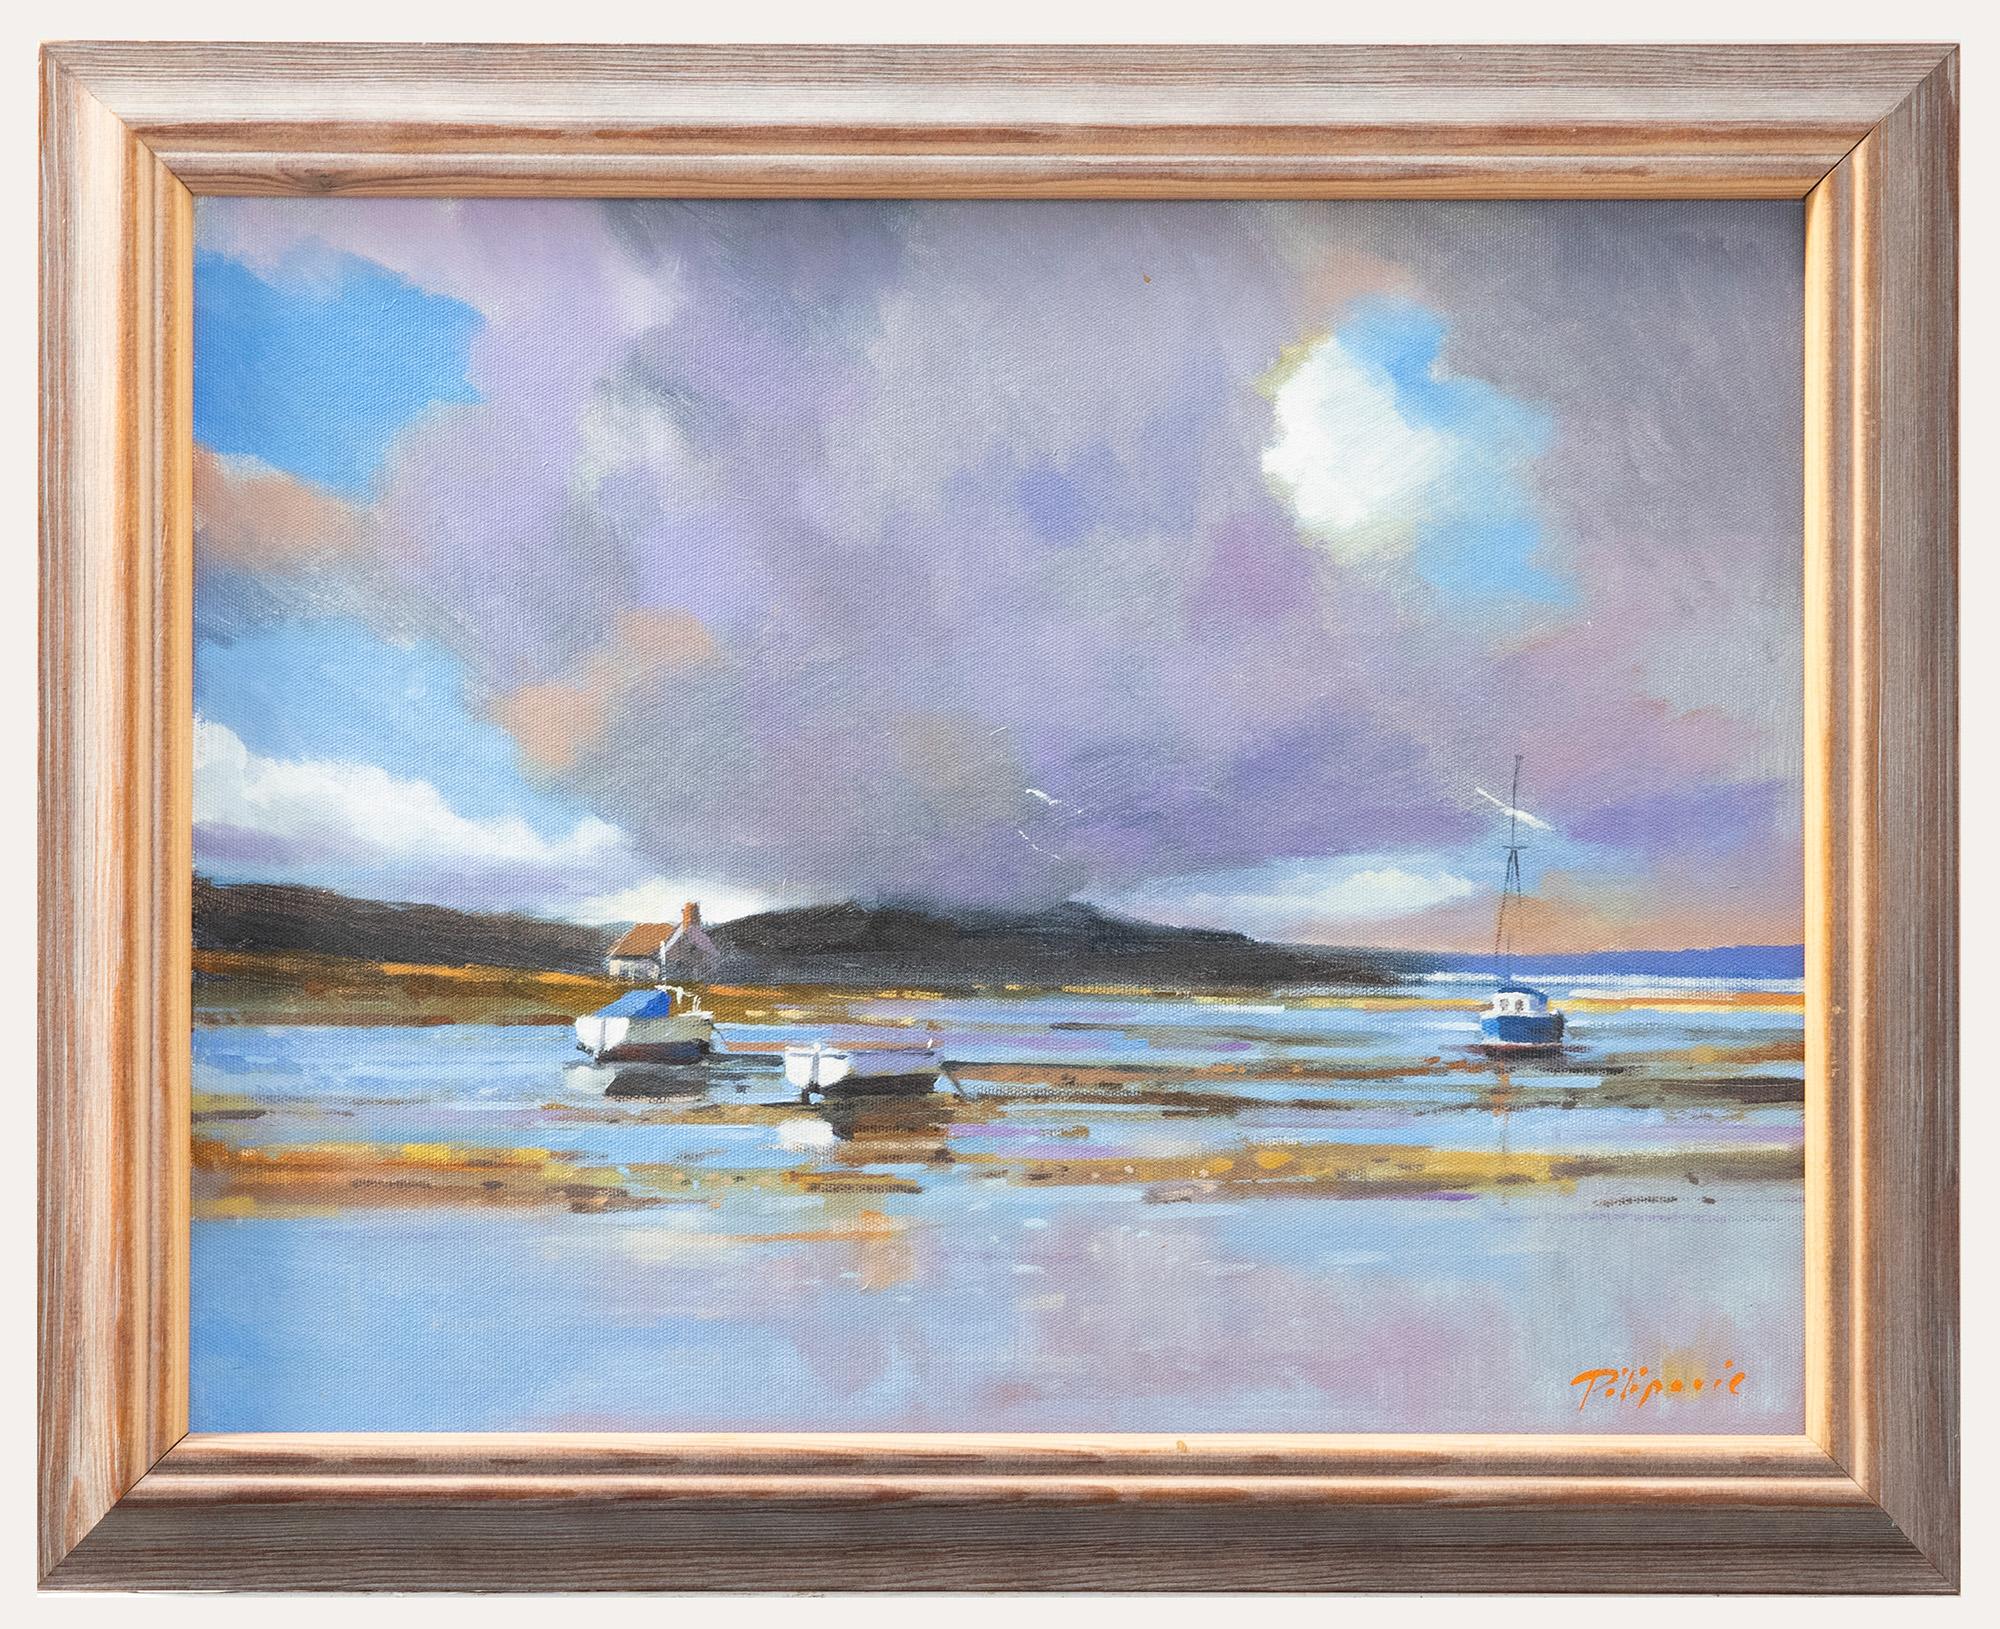 A calming estuary scene at low tide with boats moored on mud flats. Signed Pilipovic to the lower right. Well-presented in a complimenting contemporary frame. On canvas board.
